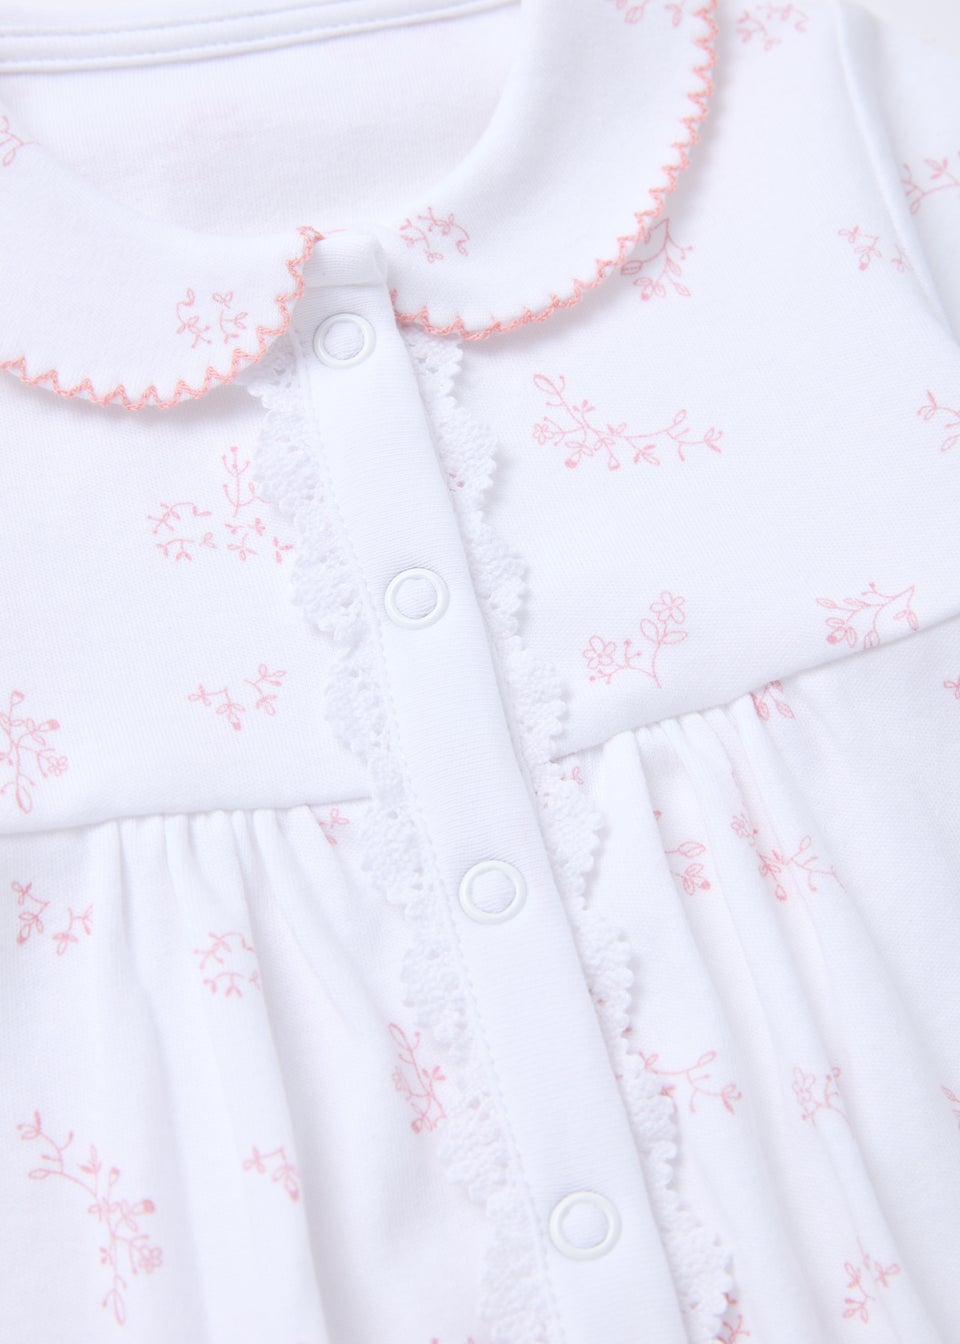 Baby White Floral Lace Sleepsuit (Tiny Baby-18mths)